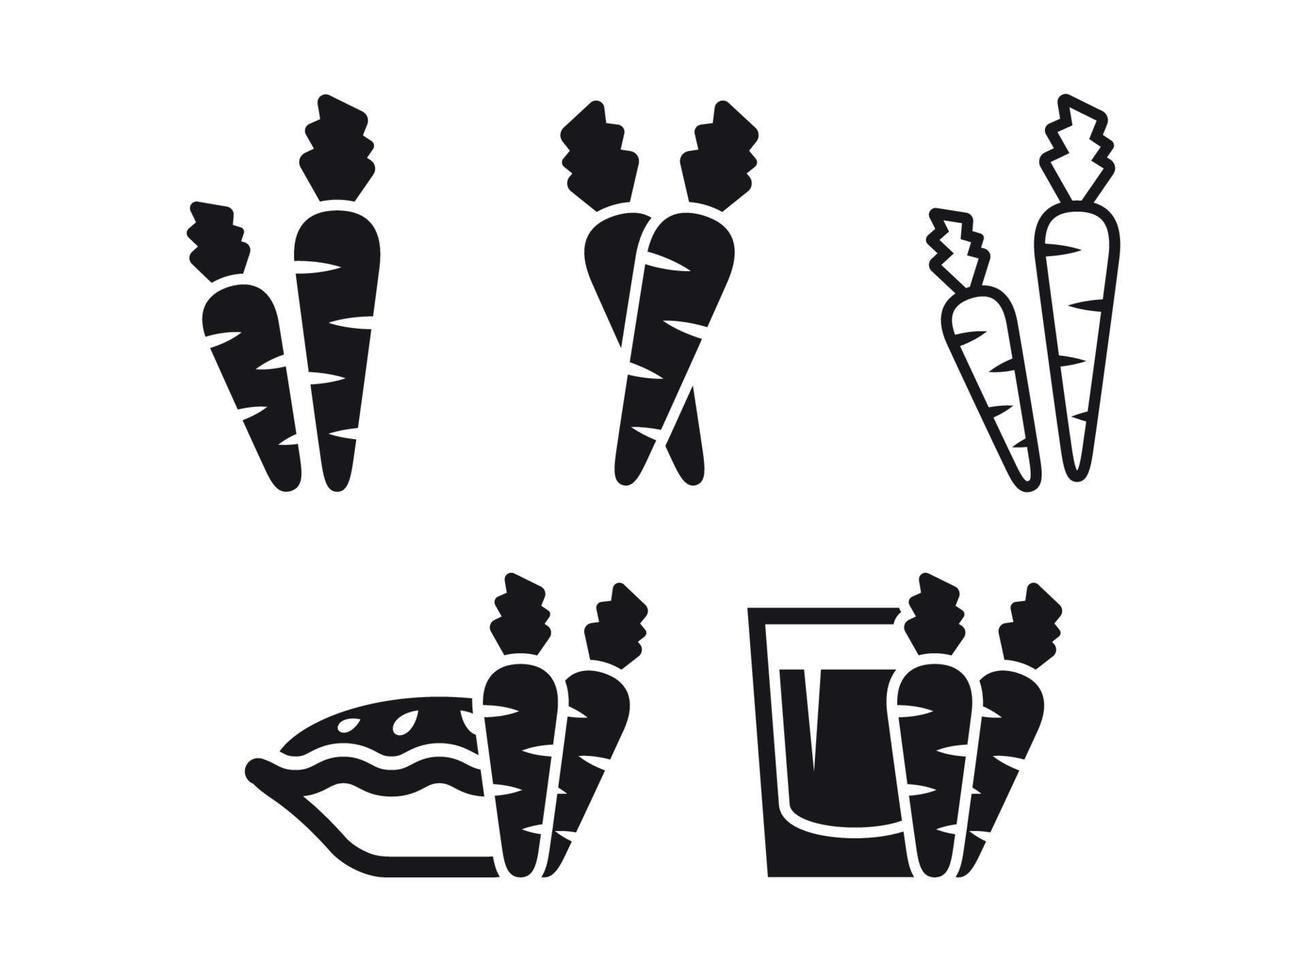 Carrot icons set. Black on a white background vector